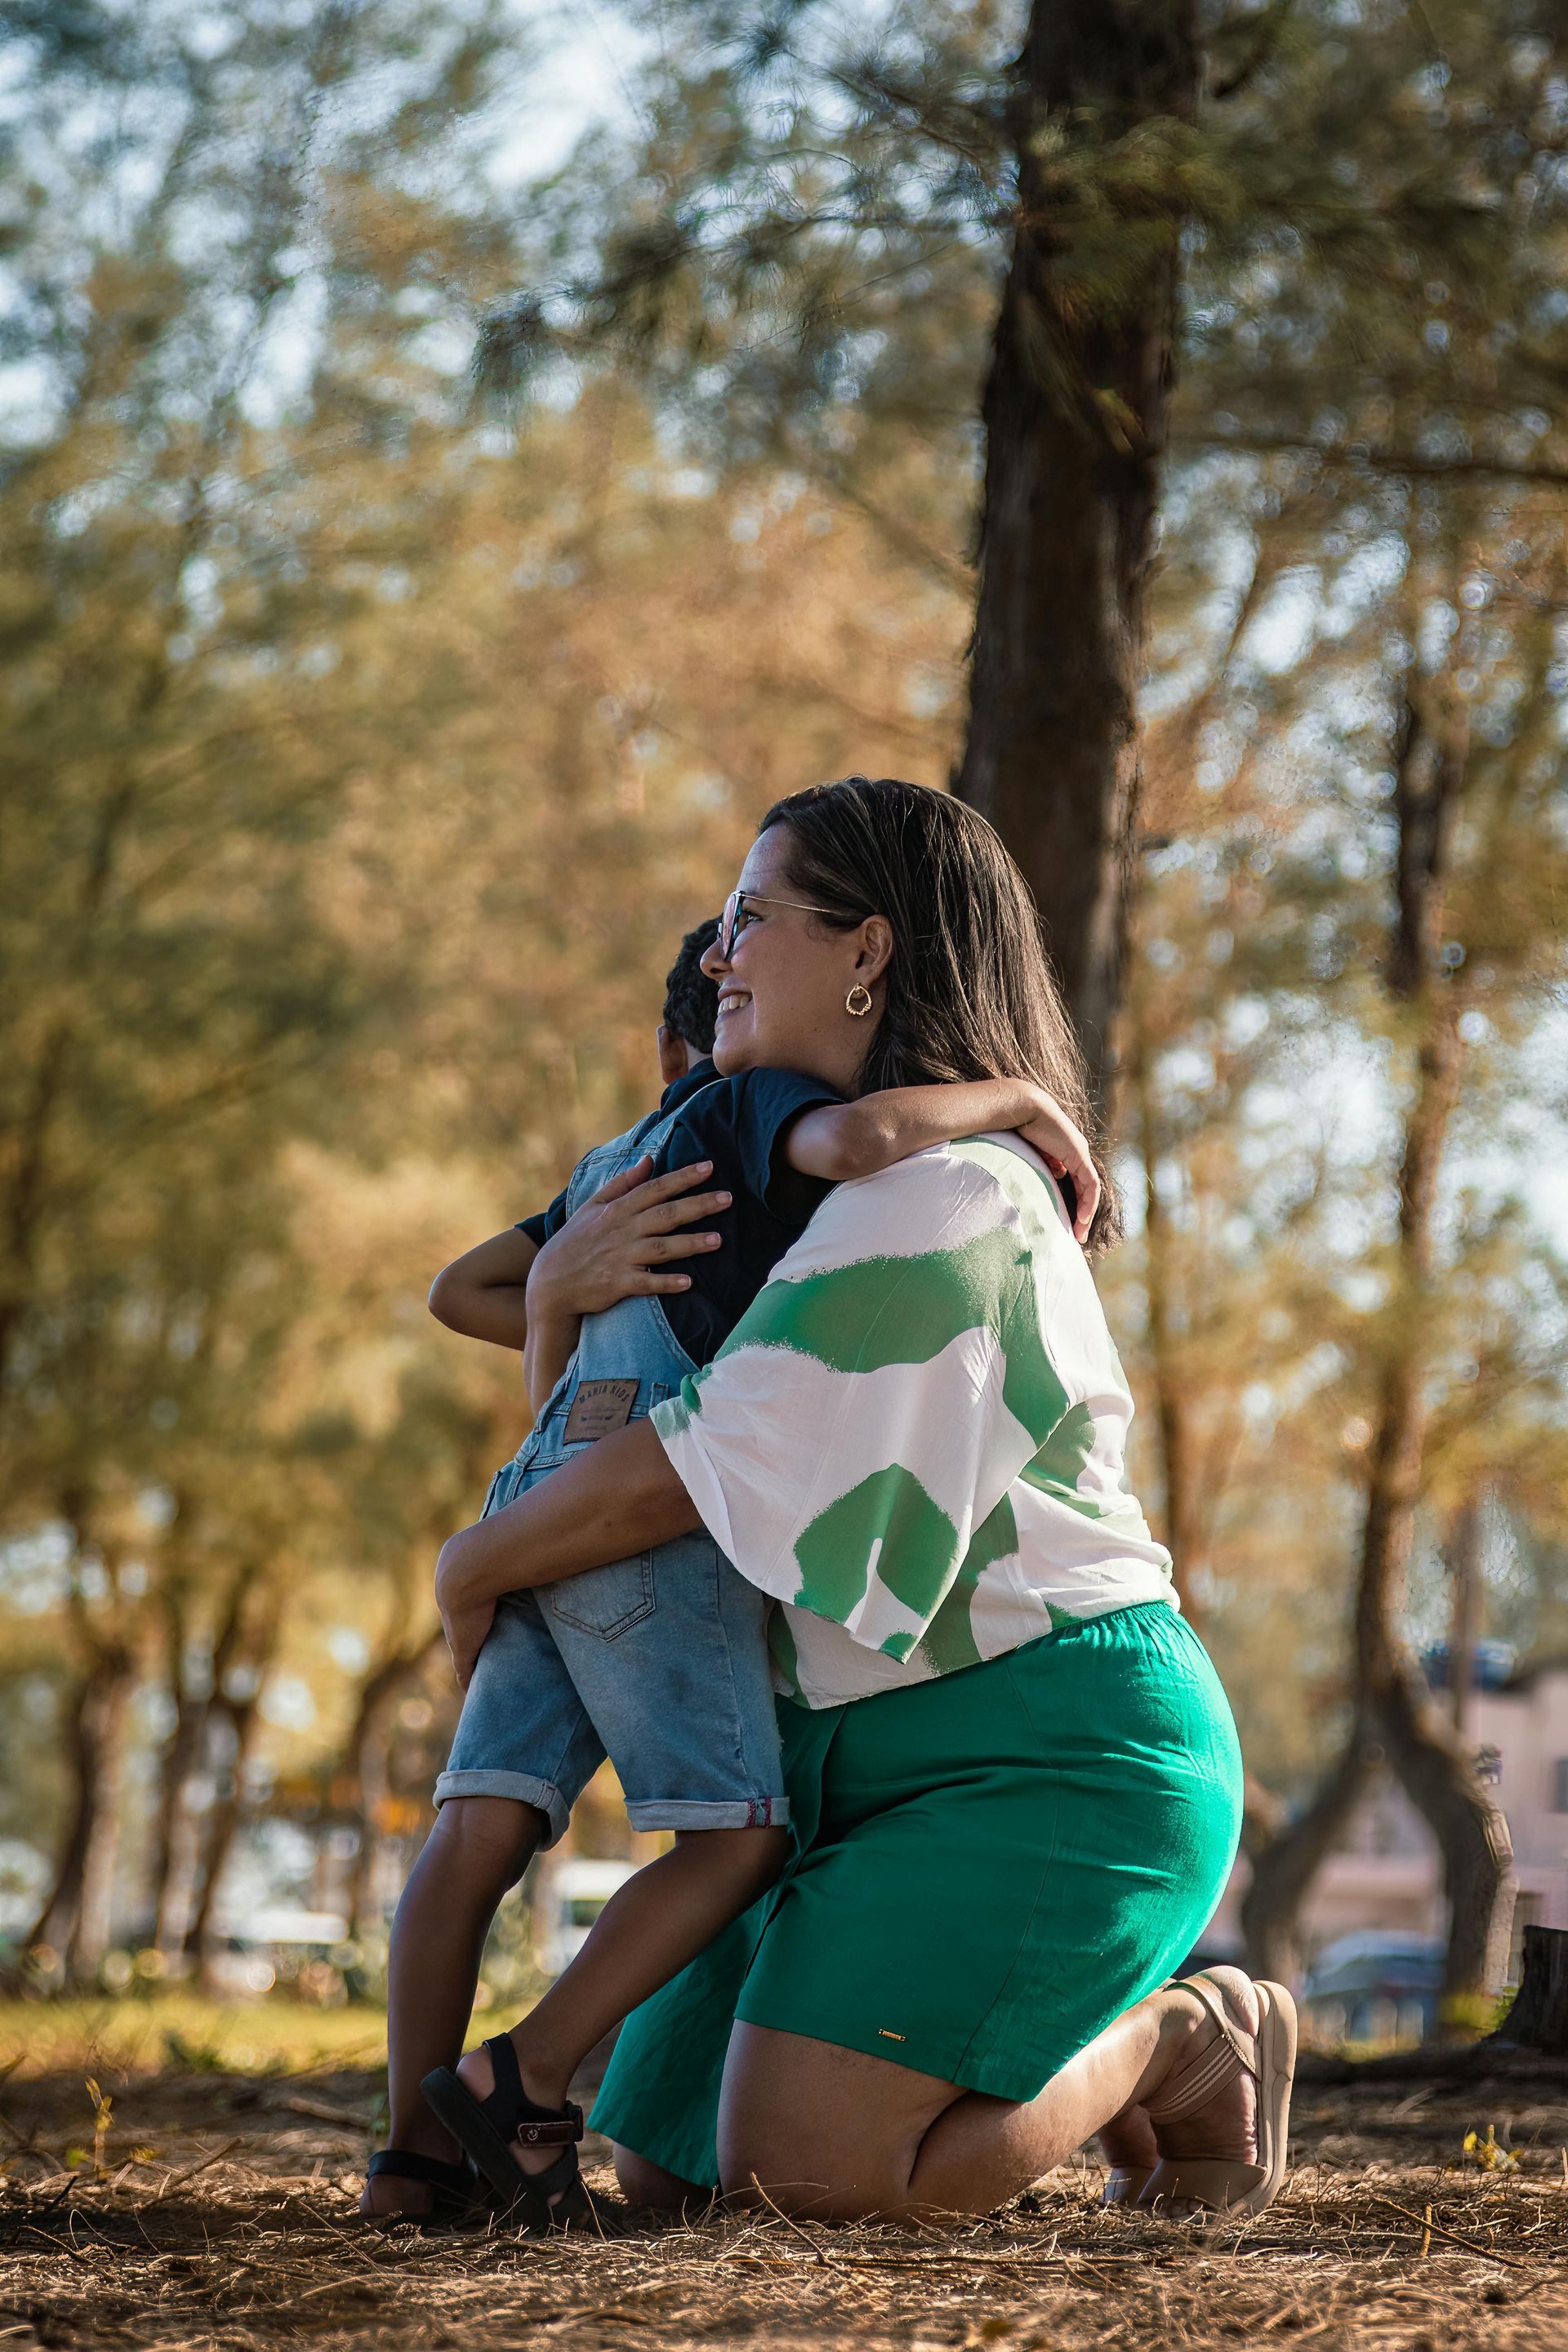 A woman is kneeling down and hugging a child in a park.